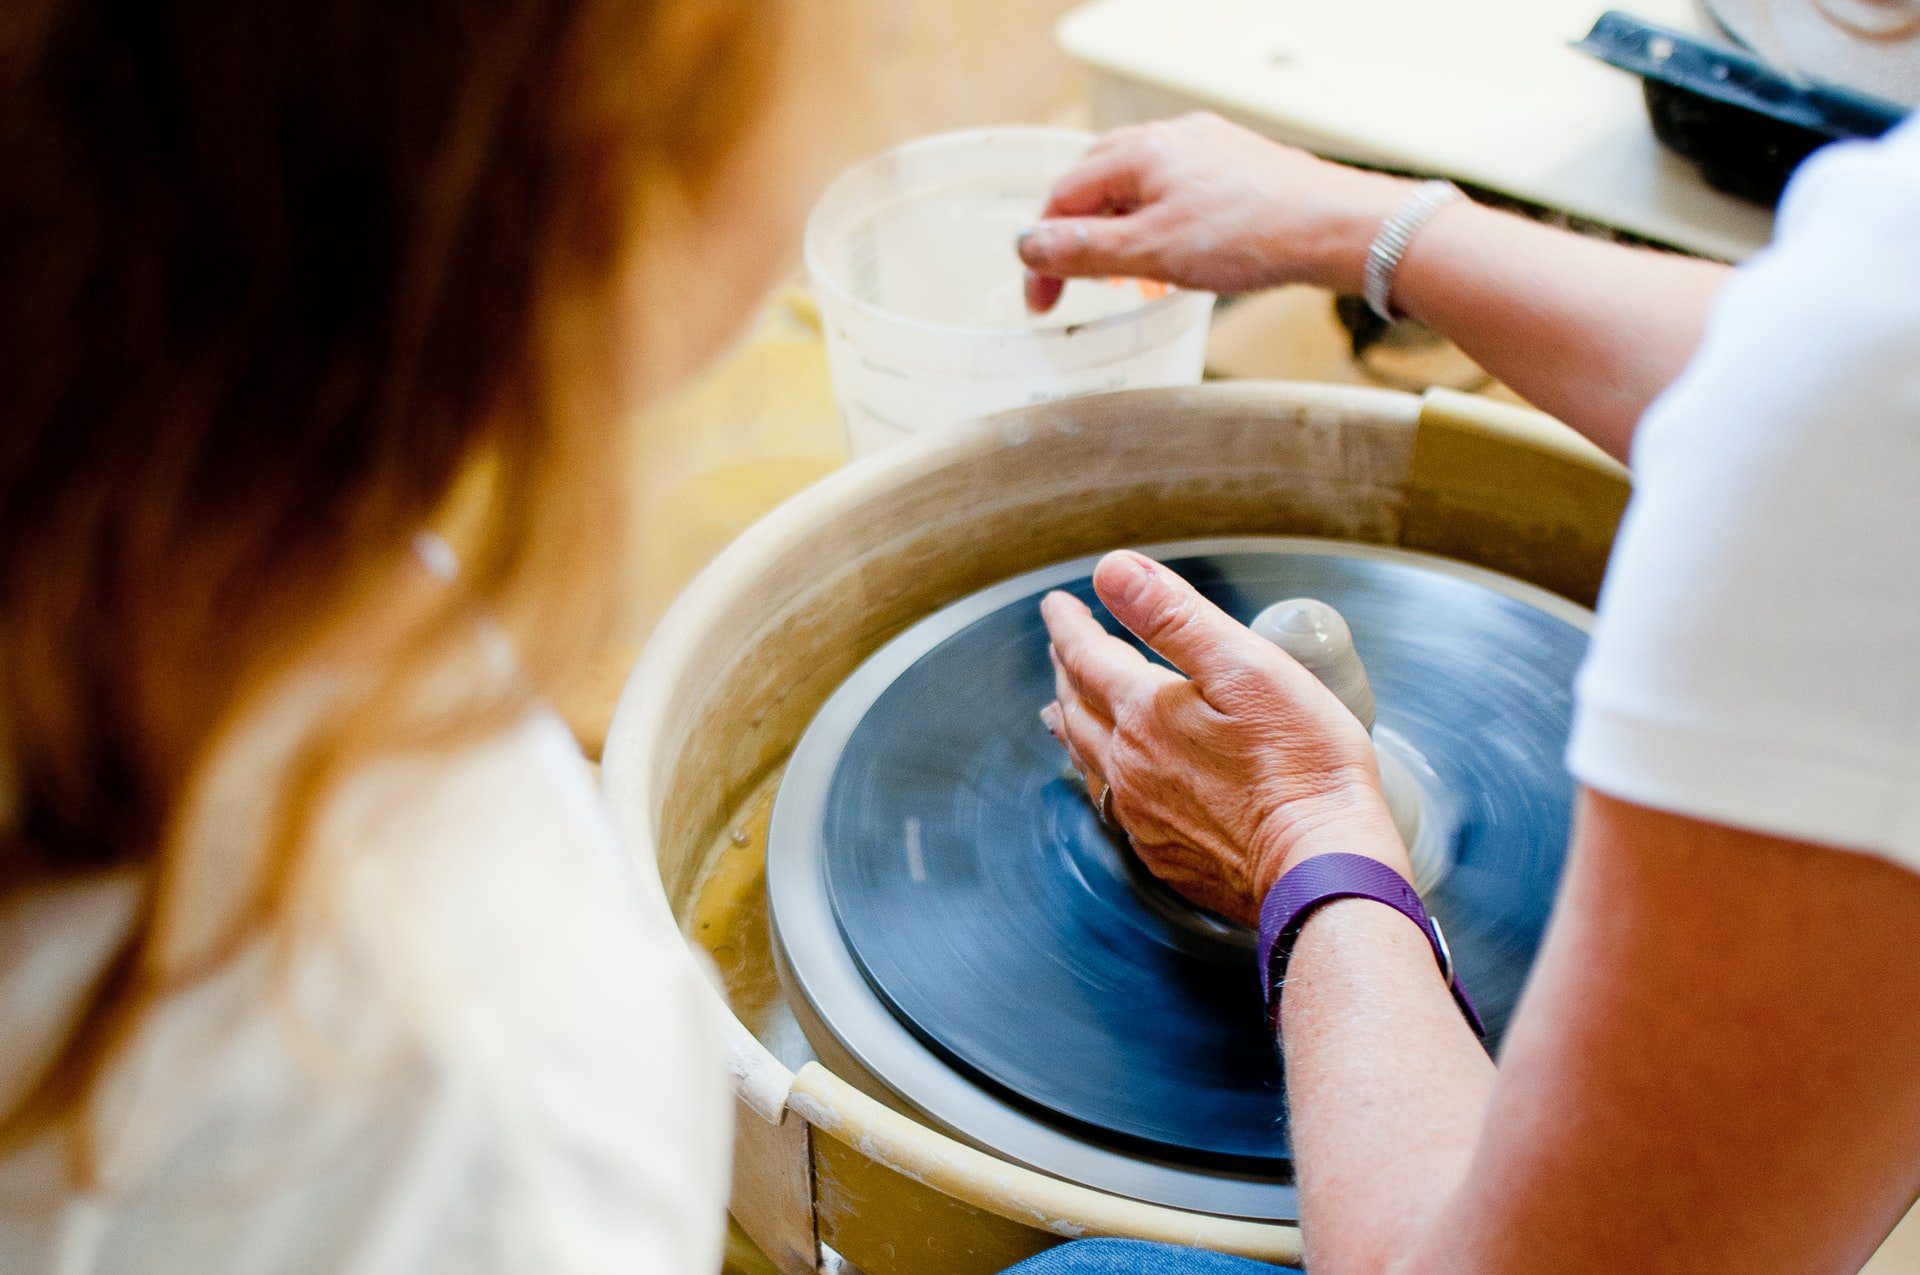 Pottery Wheel Being Used